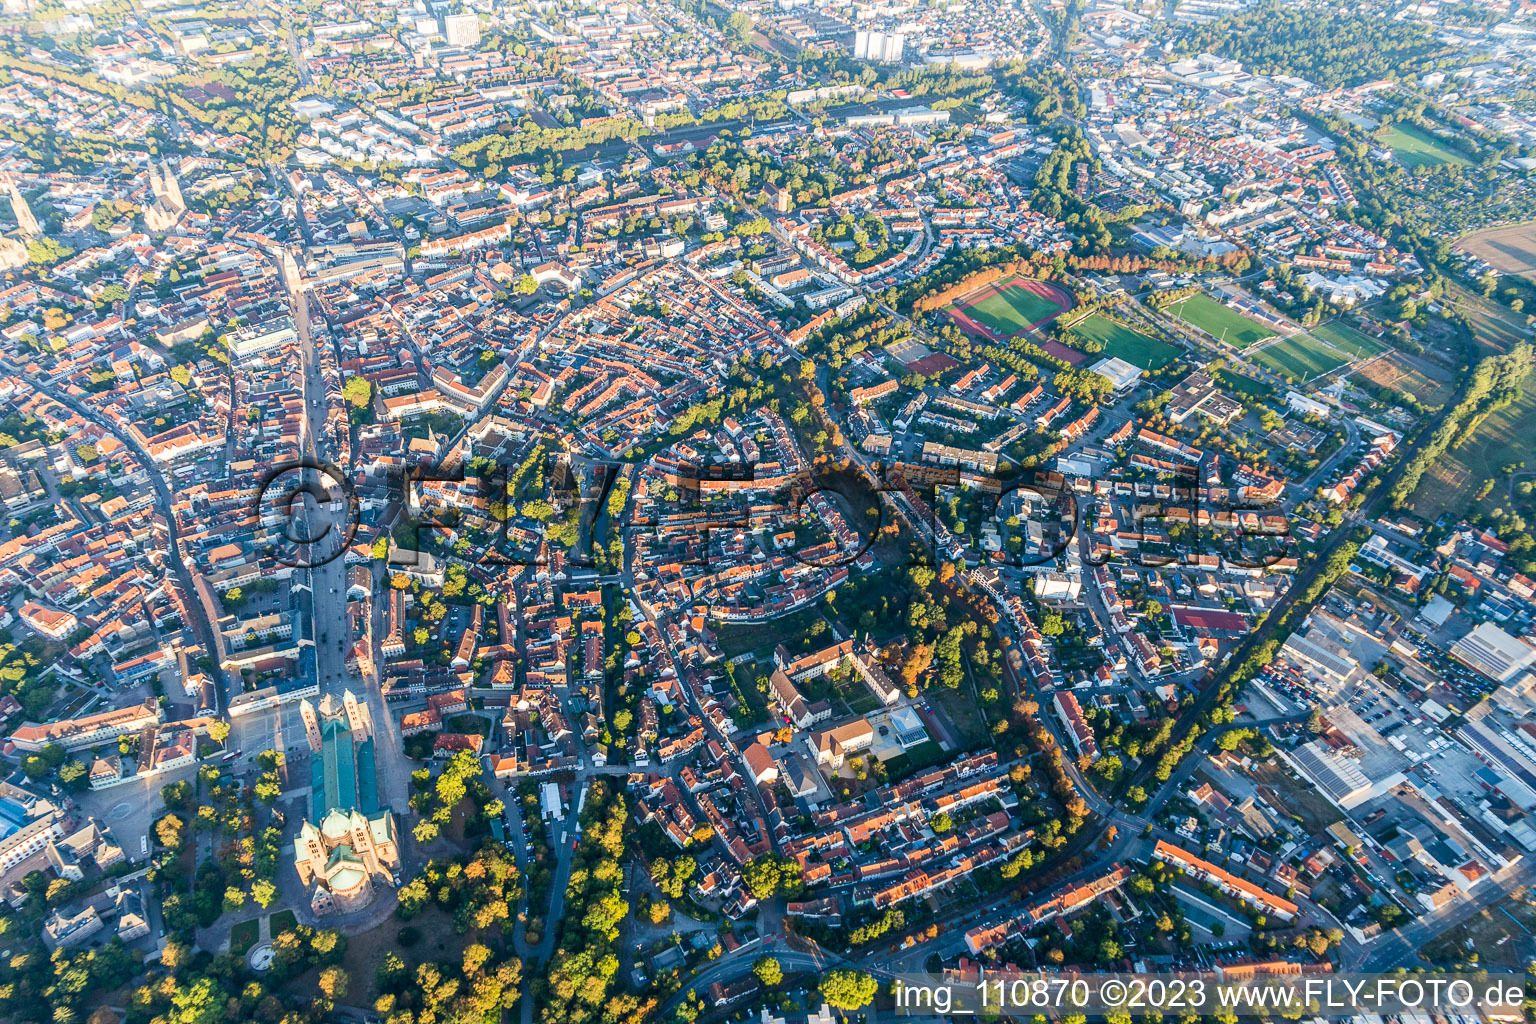 Speyer in the state Rhineland-Palatinate, Germany seen from above